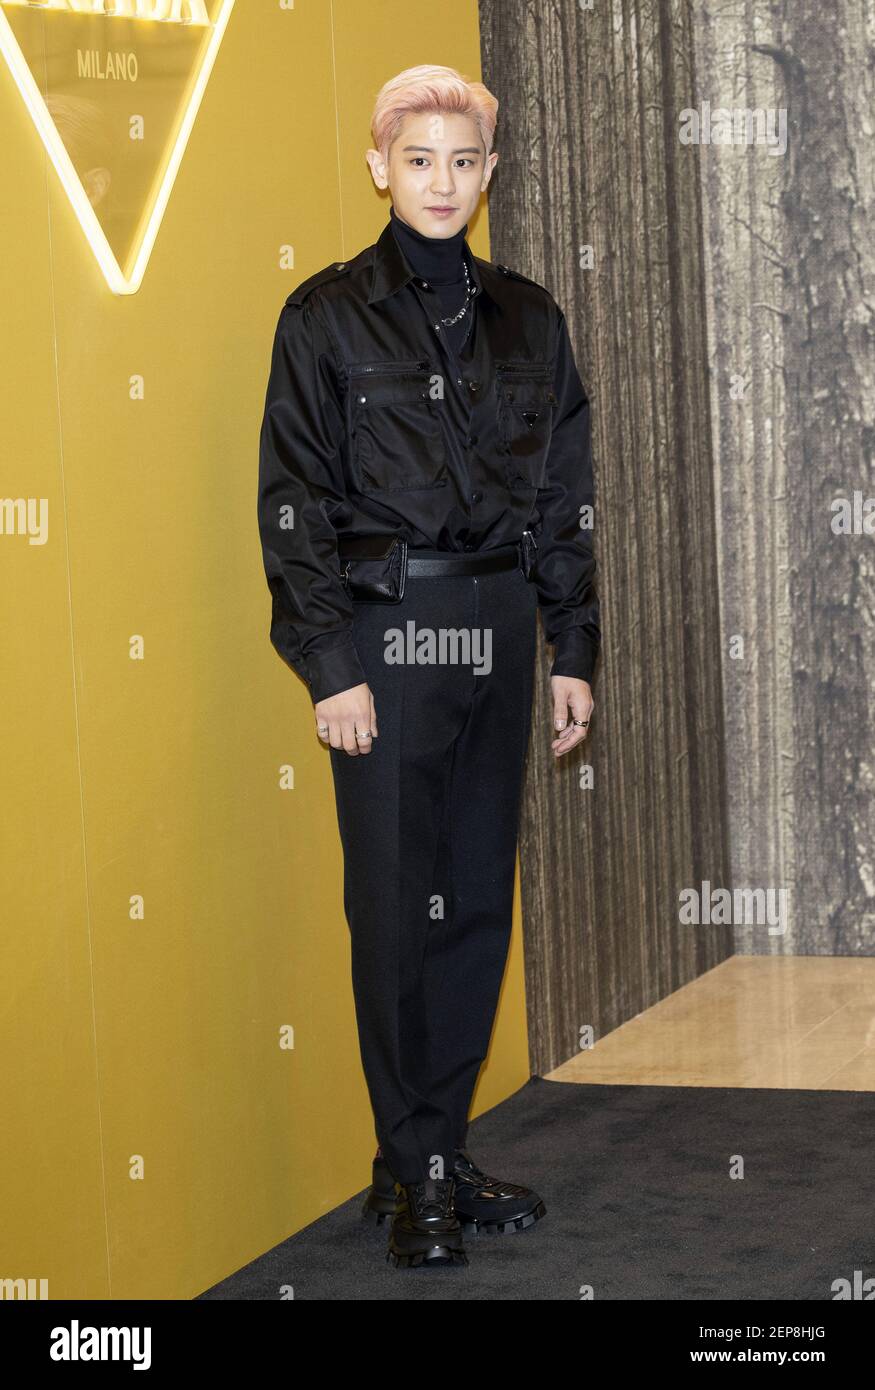 South Korean singer Chanyeol (original name: Park Chan-yeol), member of  K-Pop boy band EXO, attends a photo call for the Prada Escape Pop-up Store  Opening event at Shinsegae Department Store in Seoul,